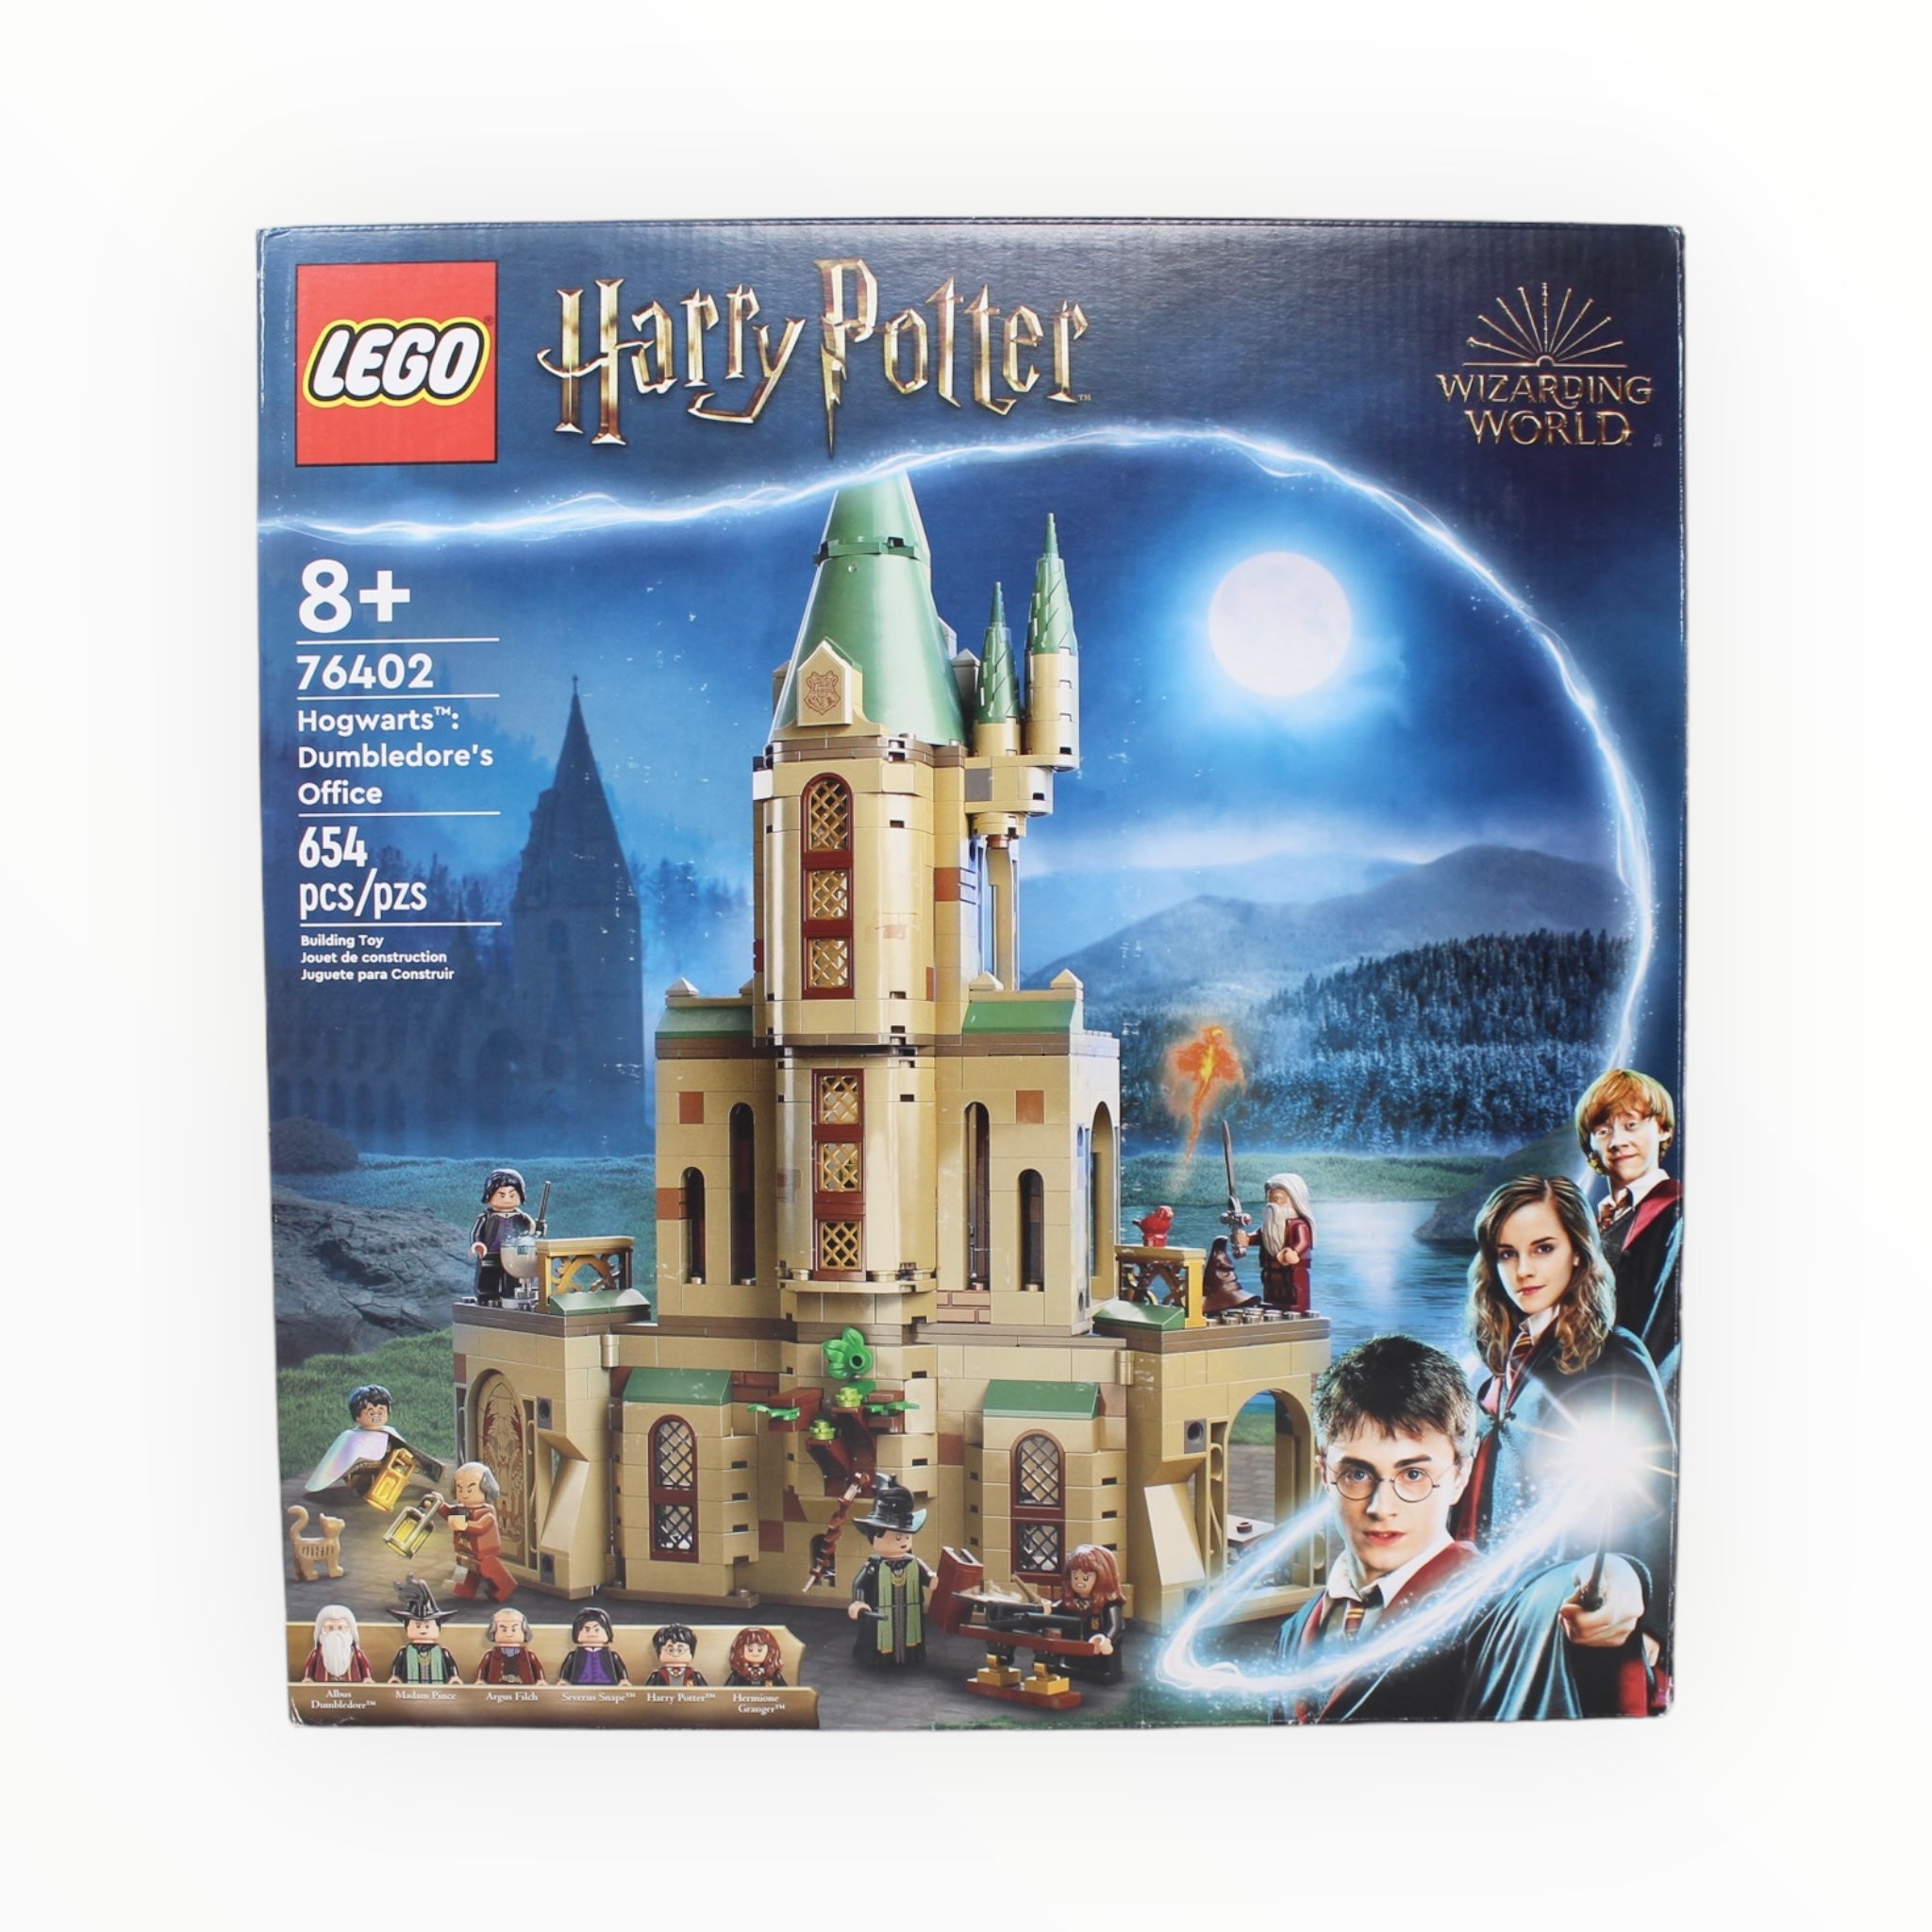 Certified Used Set 76402 Harry Potter Hogwarts: Dumbledore’s Office